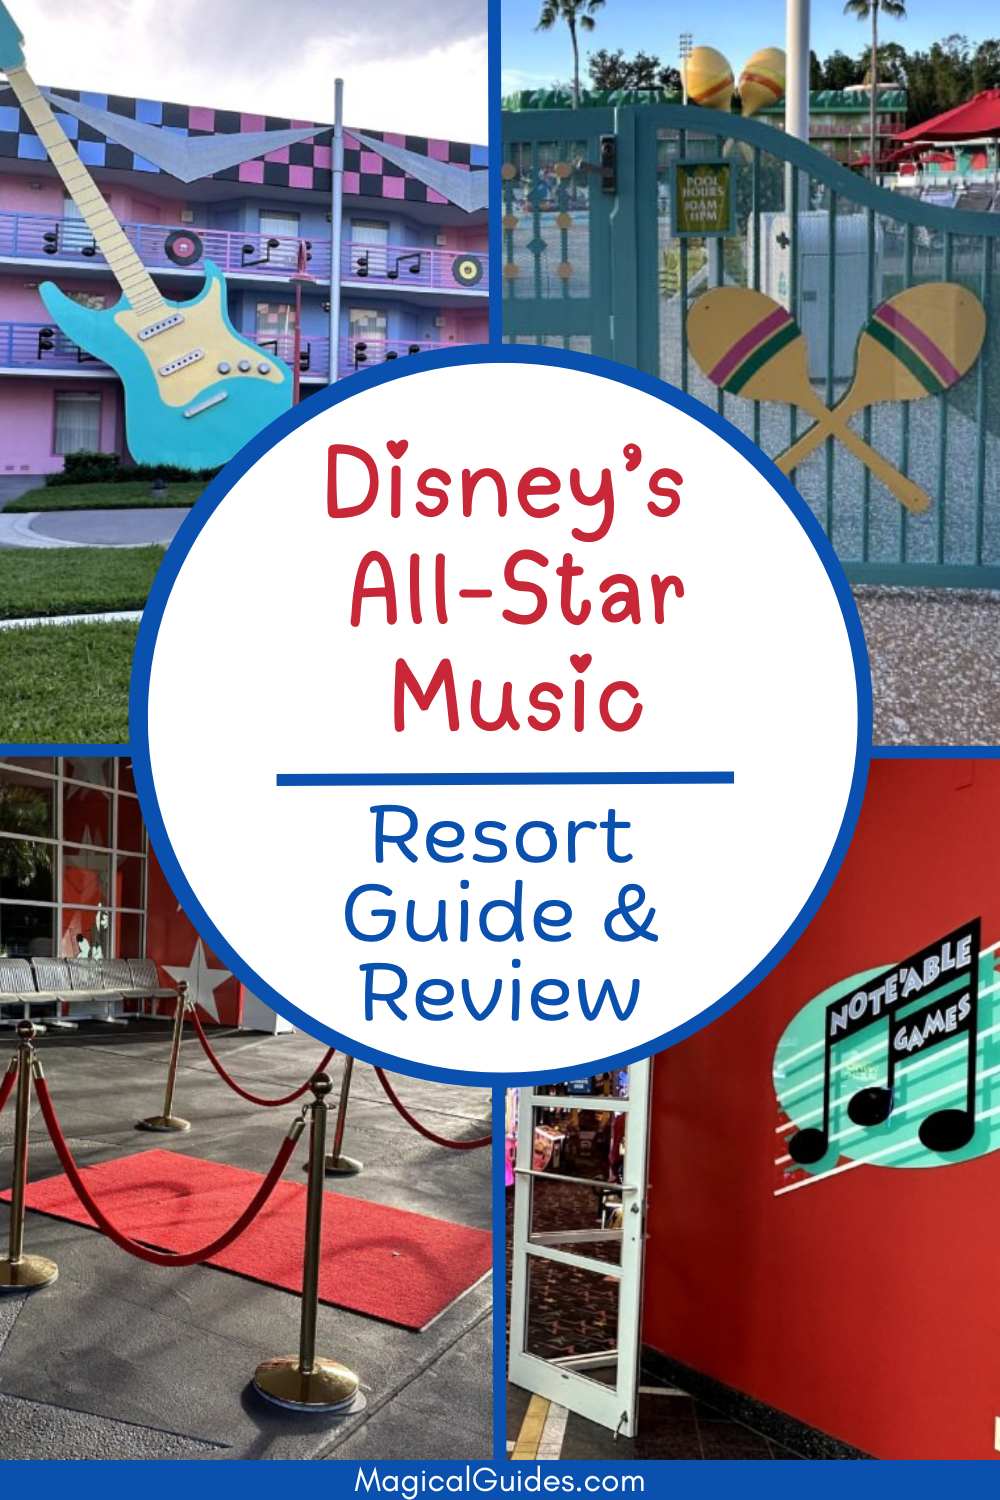 Complete resort guide to Disney's All-Star Music Resort. Dining, Shopping, Theming, Transportation, and so much more! Don't miss out on any resort activities or amenities with this guide.